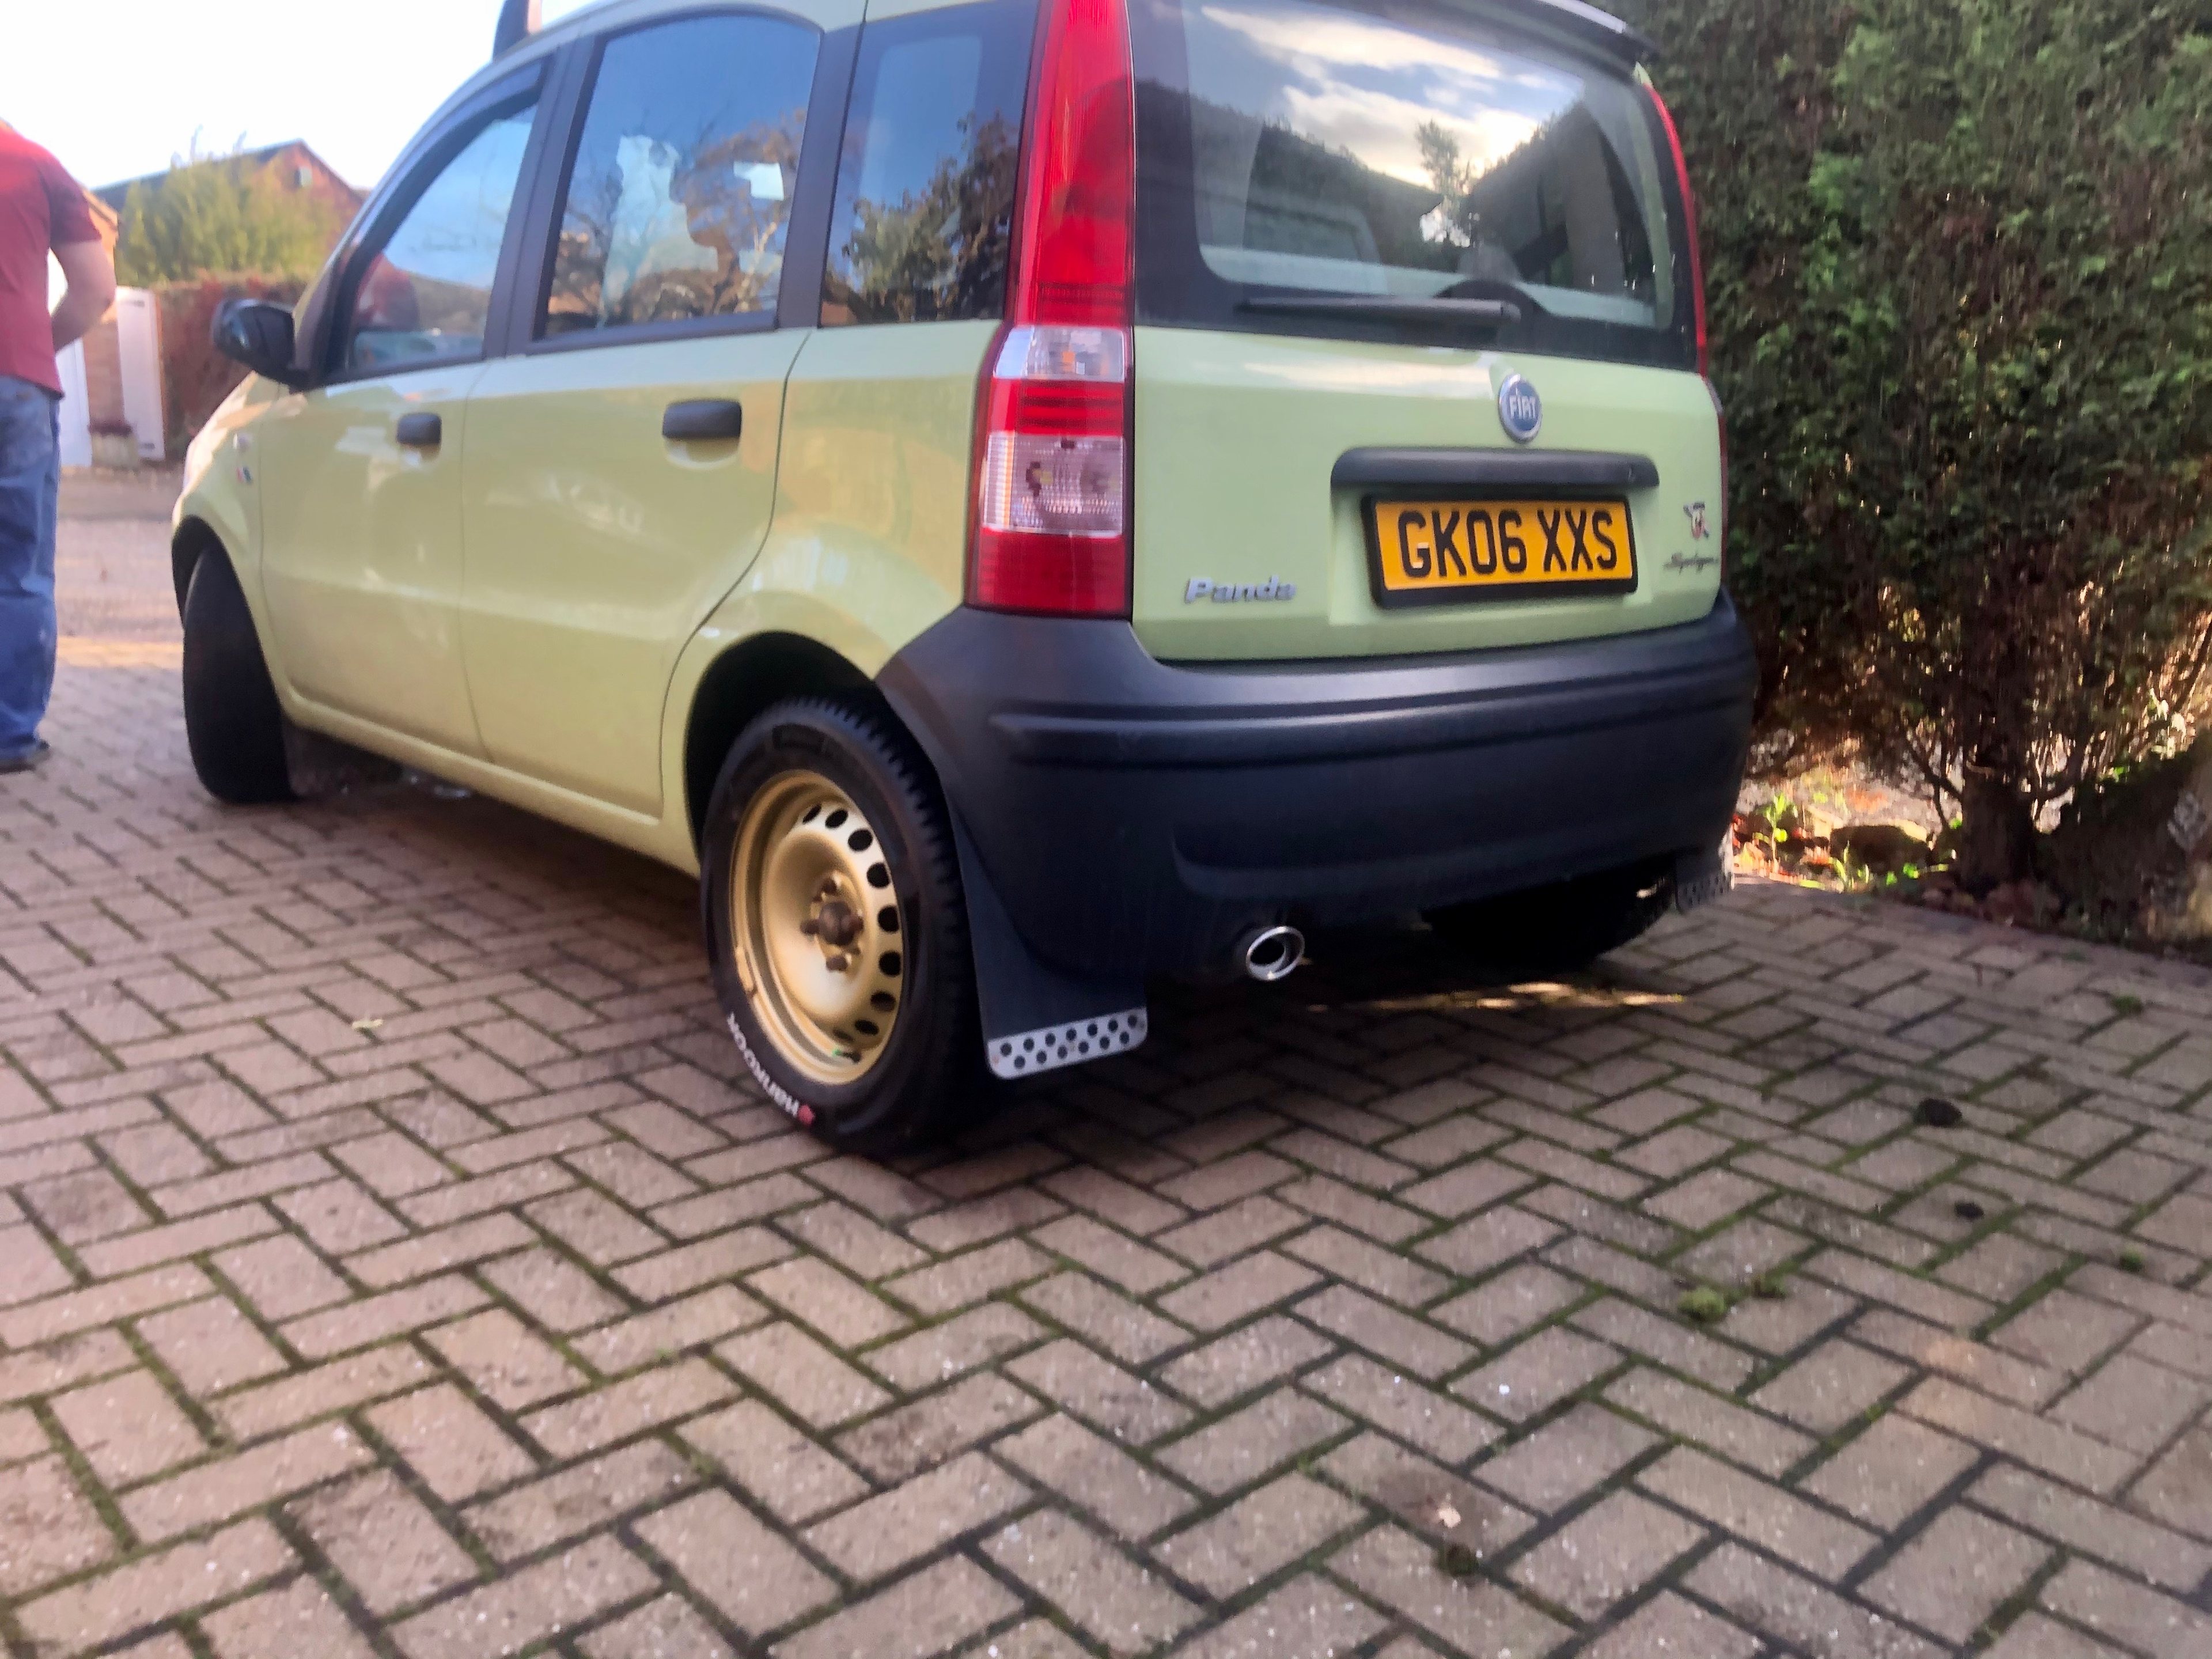 Fiat Panda 1.1 Active - Page 1 - Readers' Cars - PistonHeads